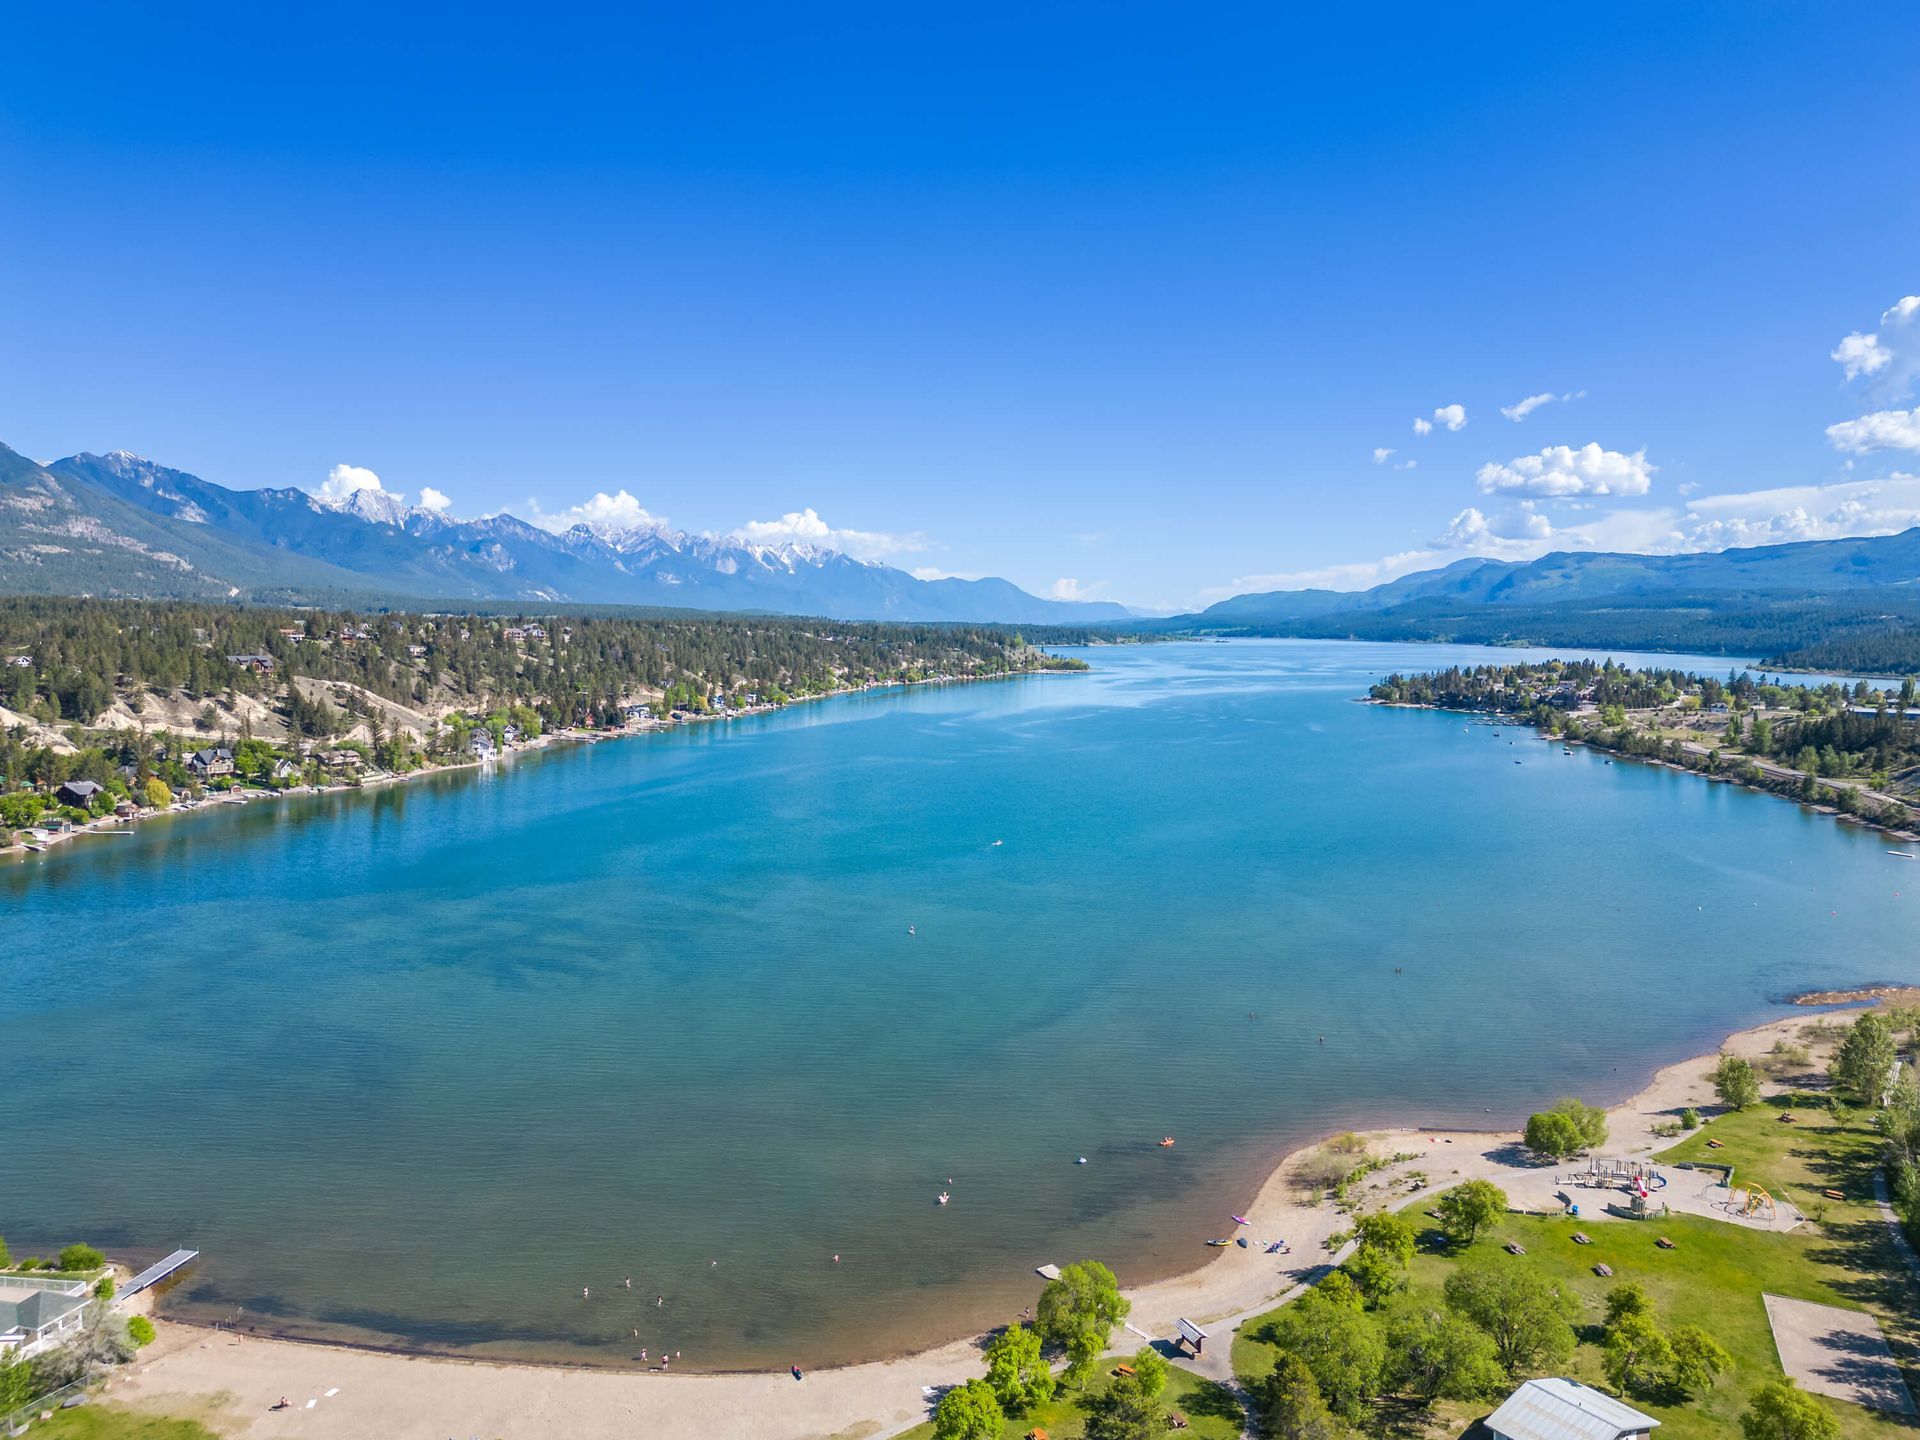 Lake views of the lake view condo in Lake Windermere Pointe BC Vacation Rental in Invermere hosted by Aisling Baile Property Management. 